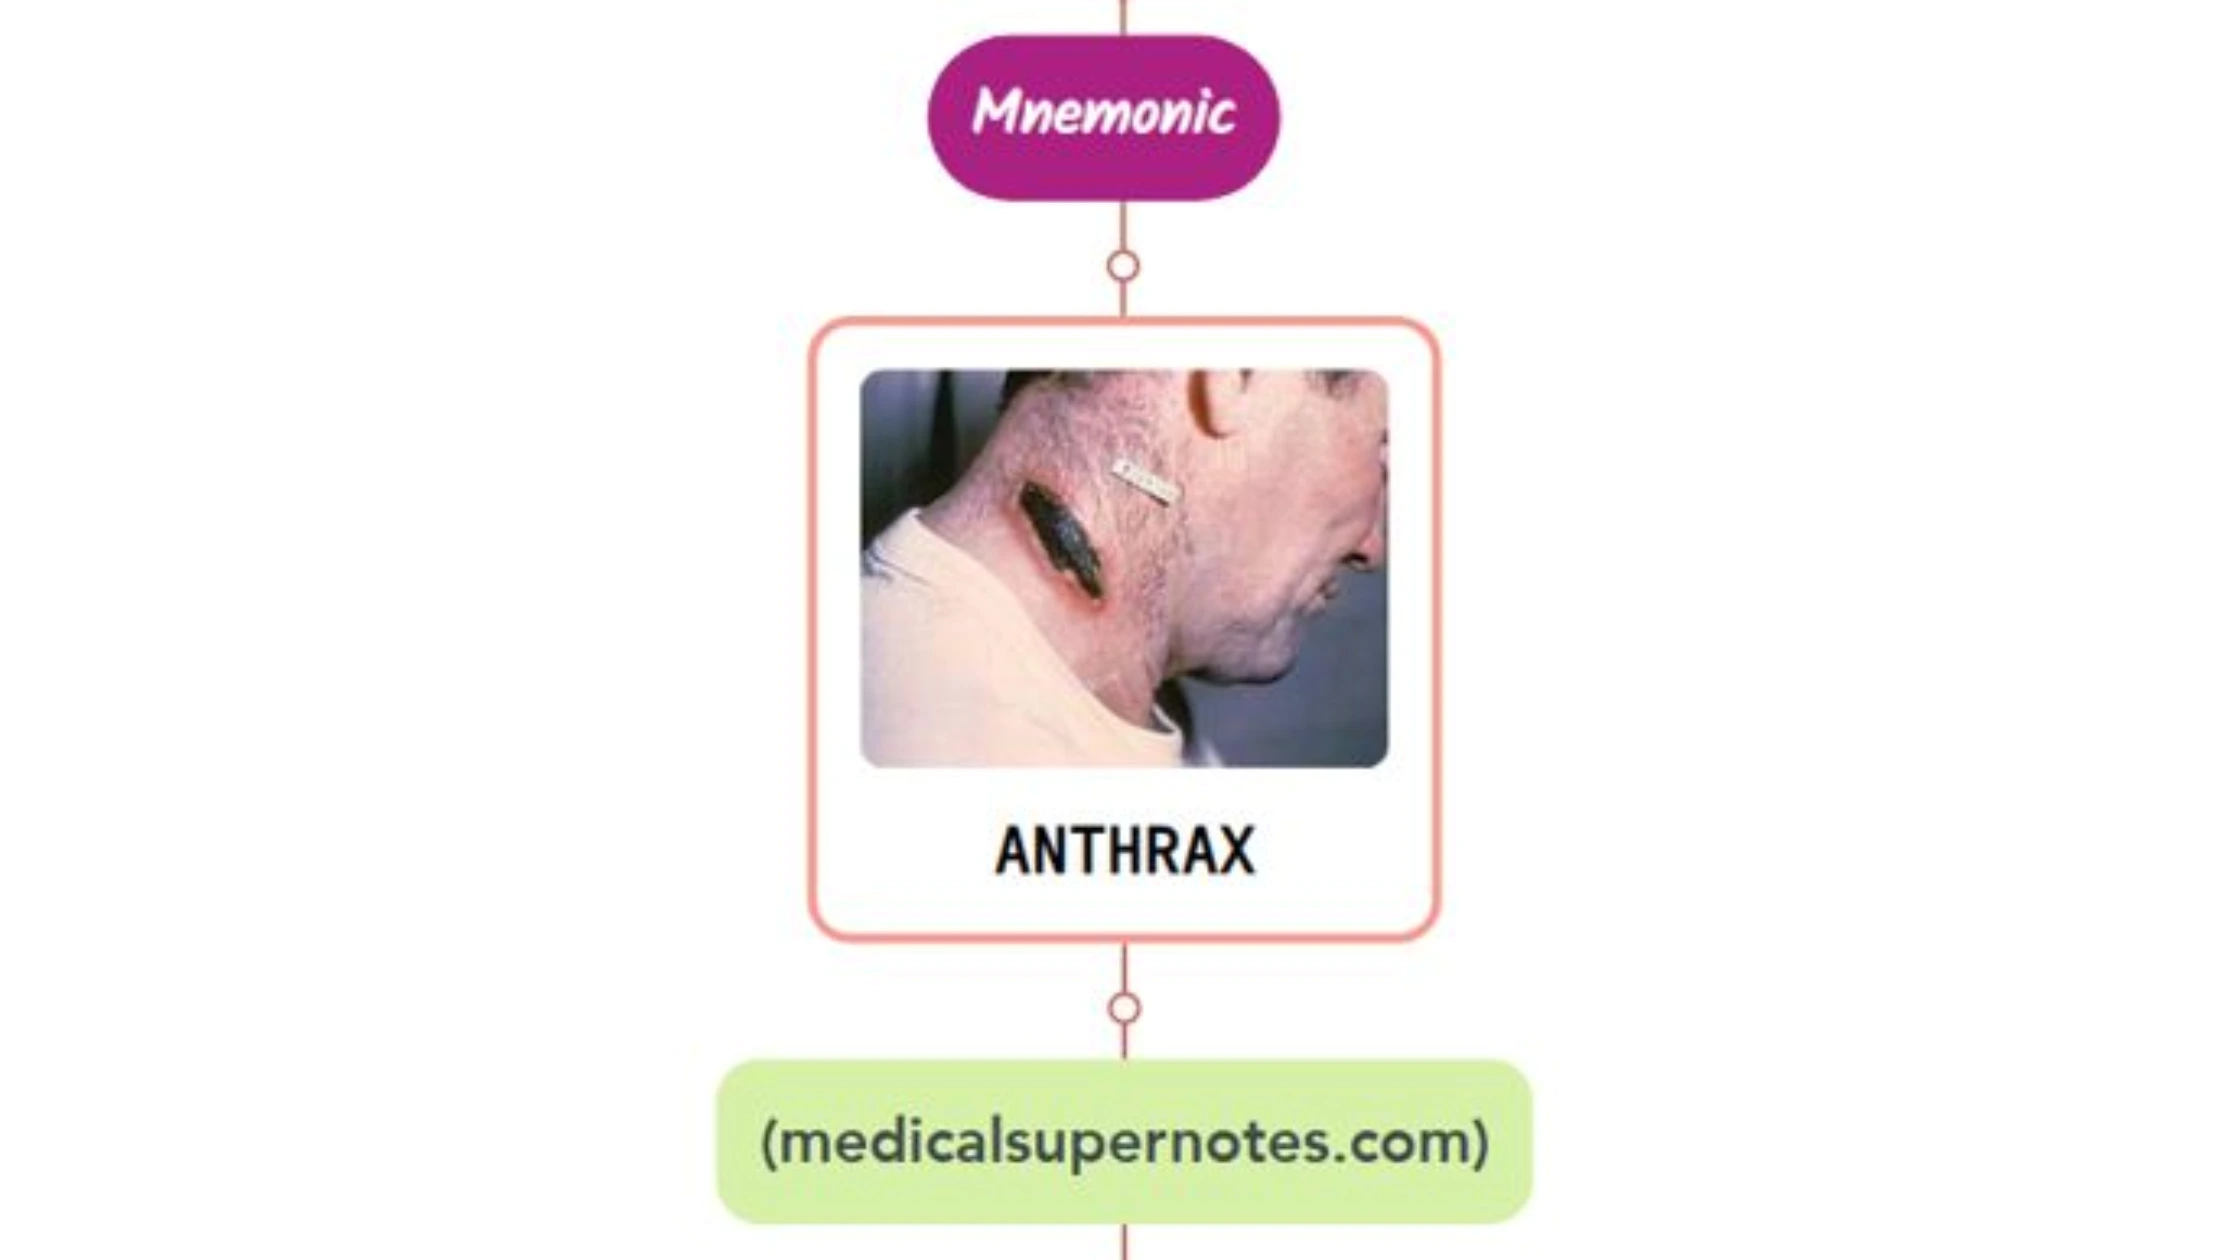 You are currently viewing Anthrax Rash Mnemonic